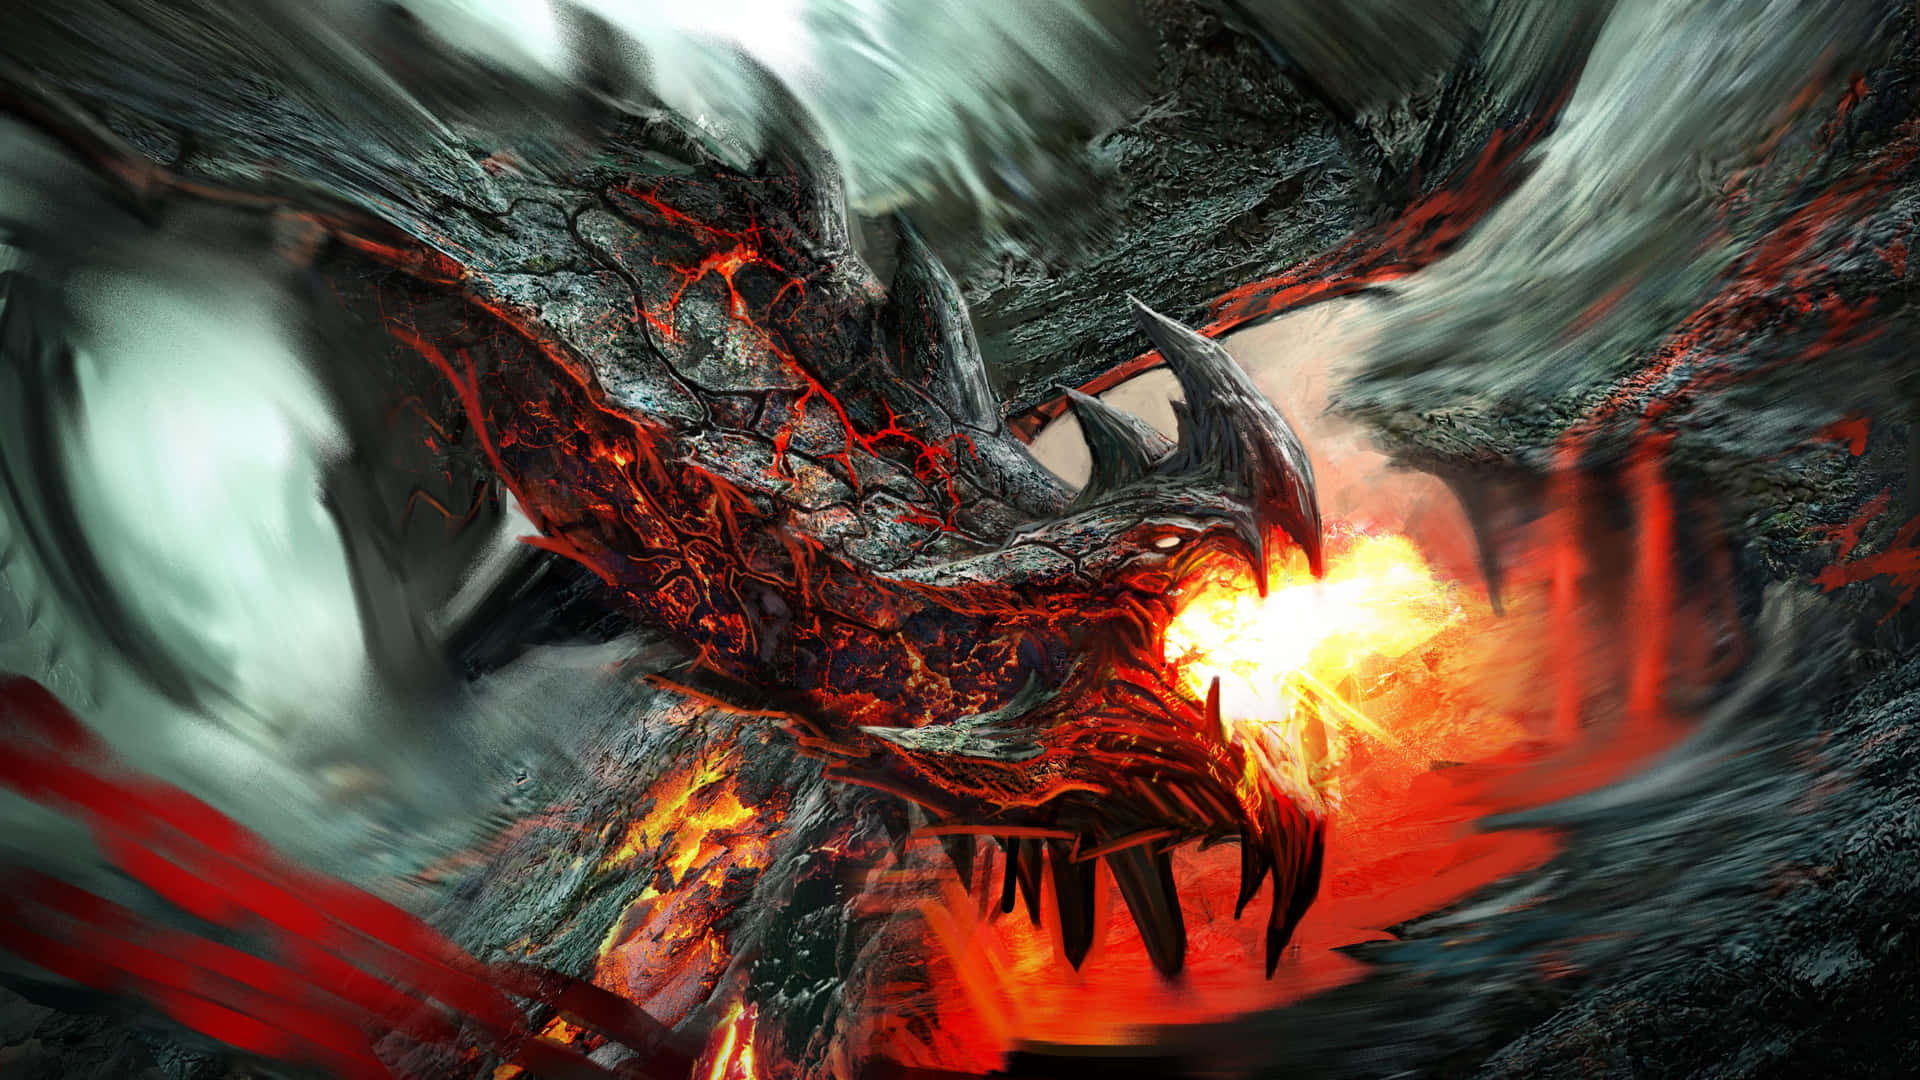 Protecting its prized possession, the Black Dragon looks fiercely into the horizon Wallpaper